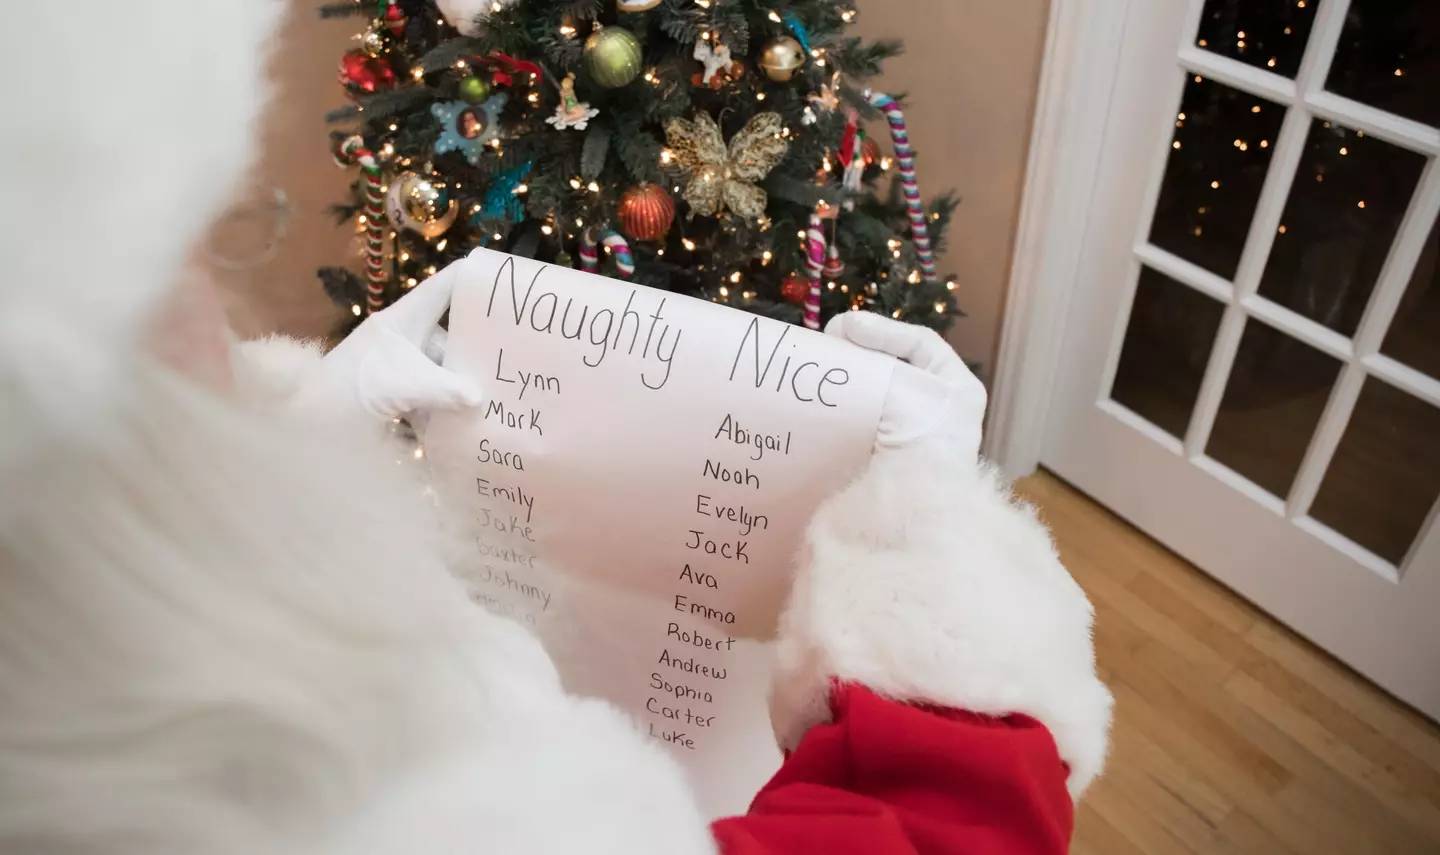 We think Santa might be on the naughty list this year... (